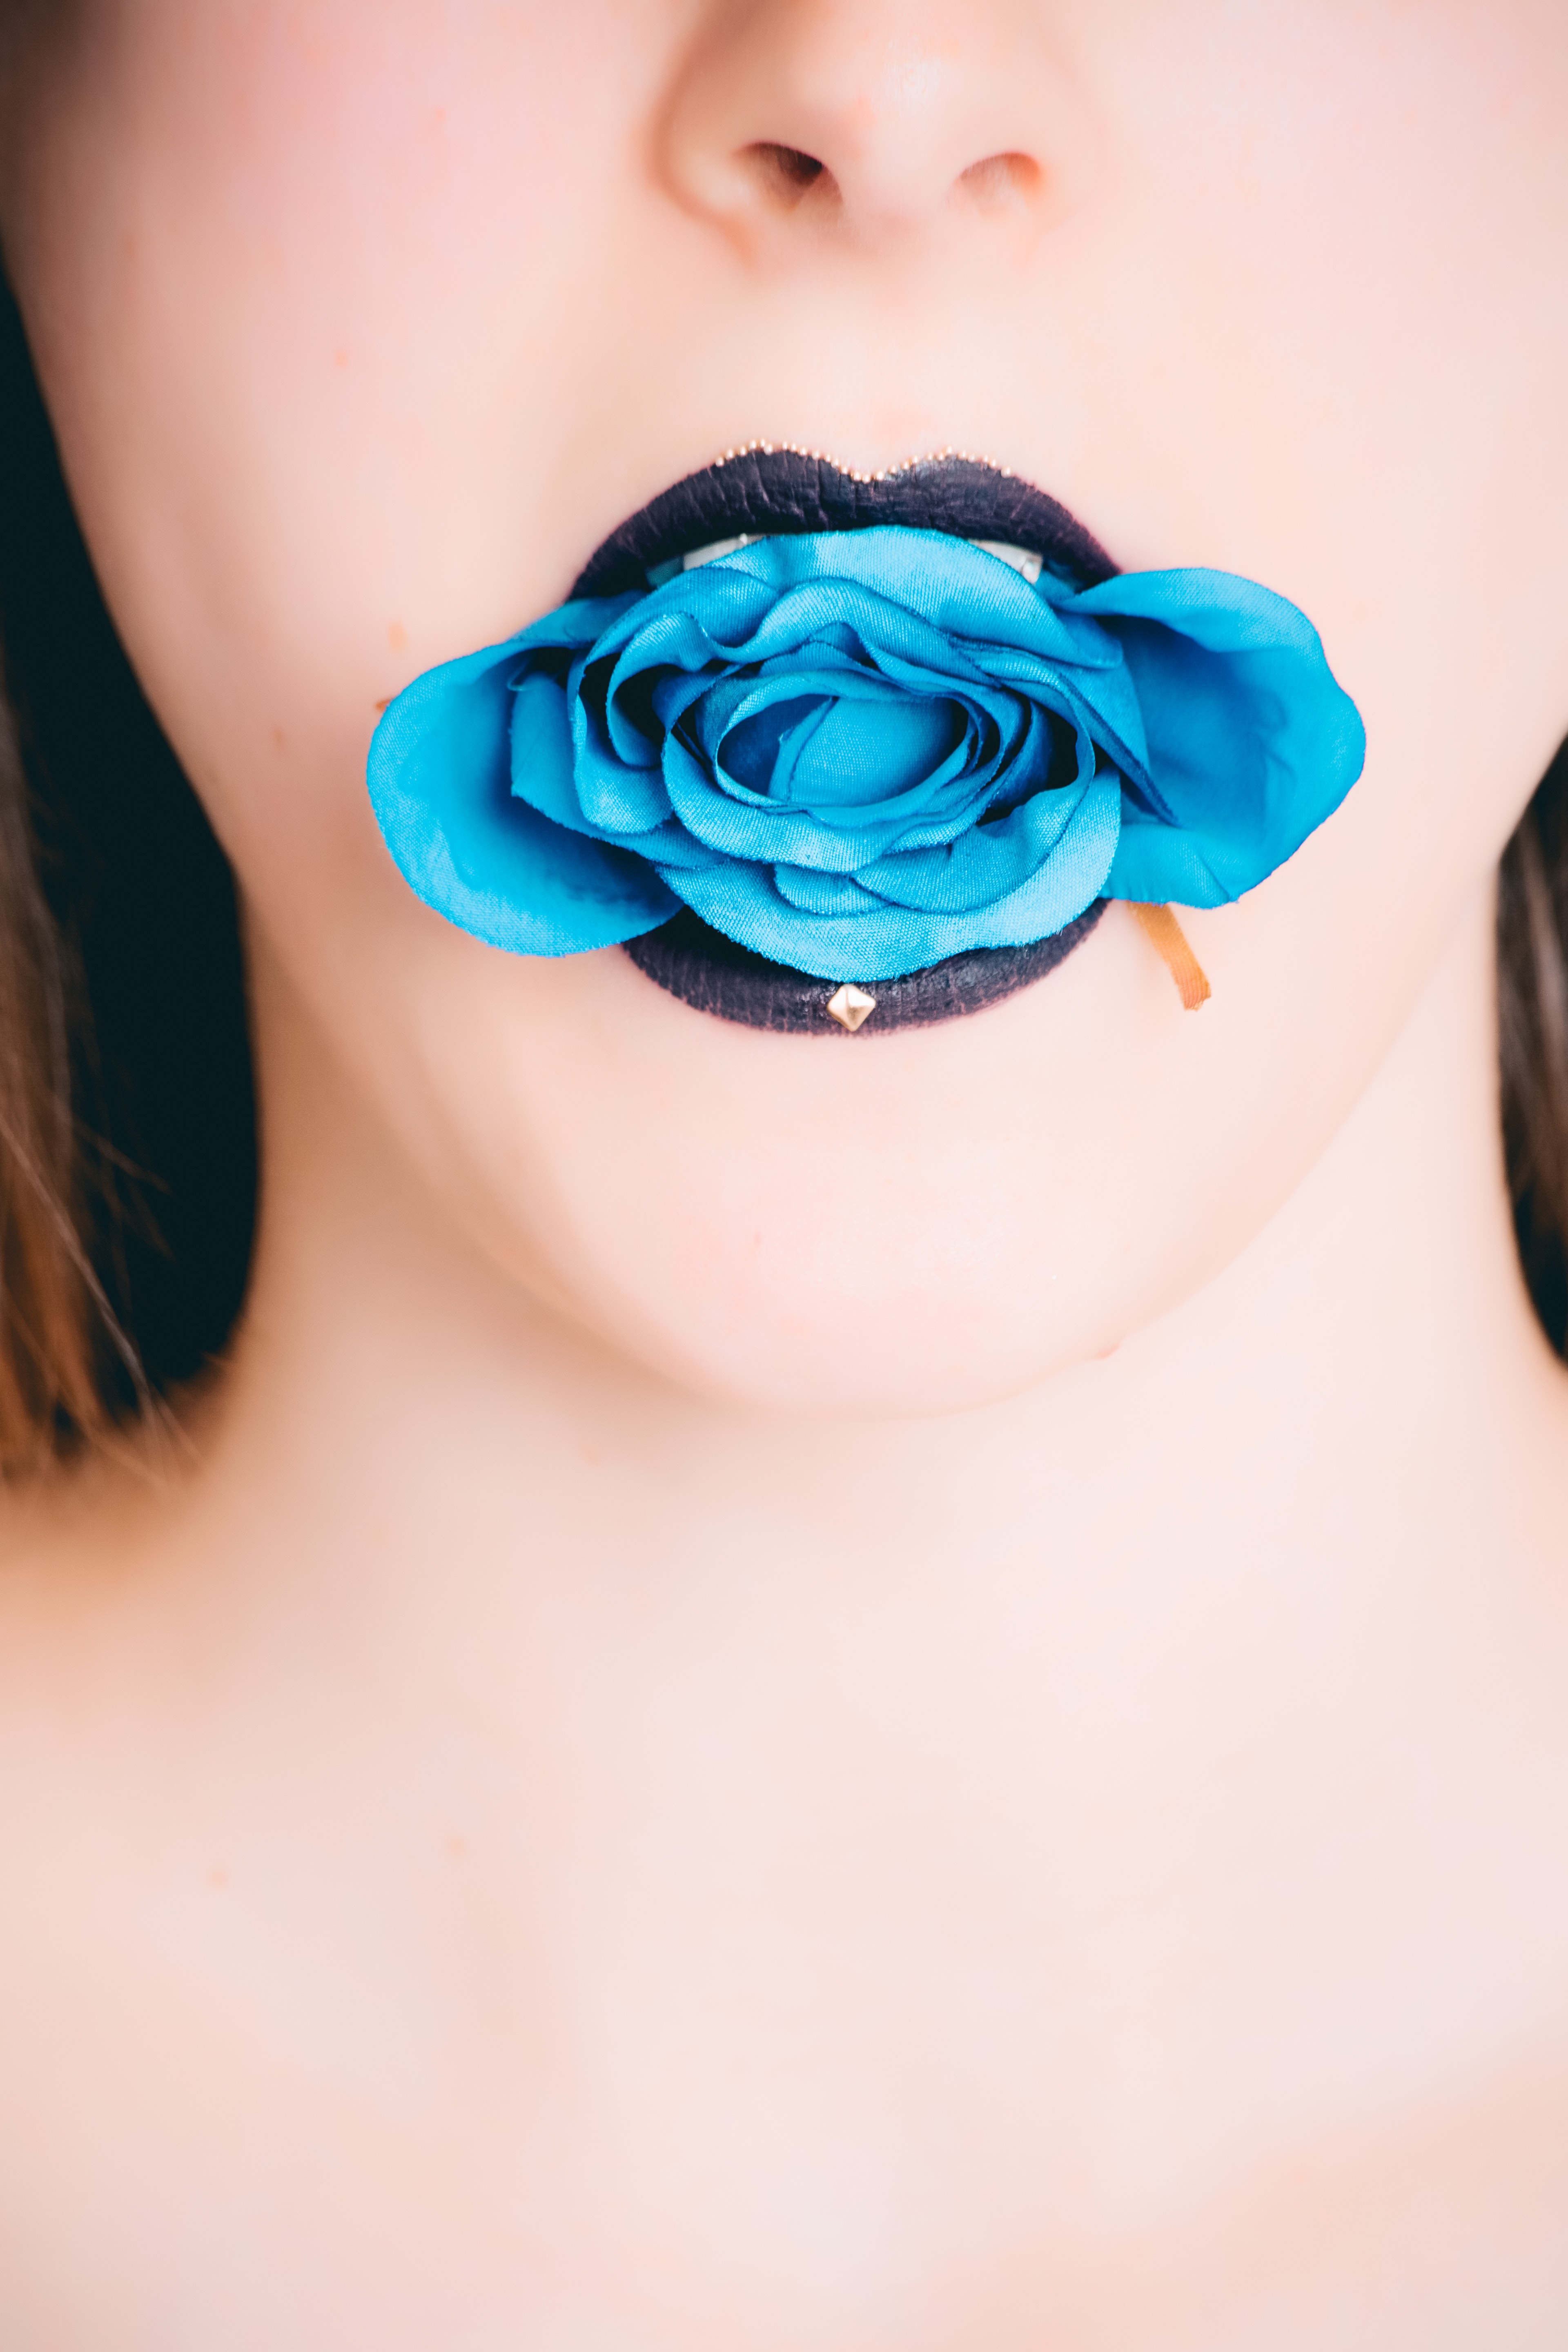 Woman wearing black lipstick with blue rose on mouth photo